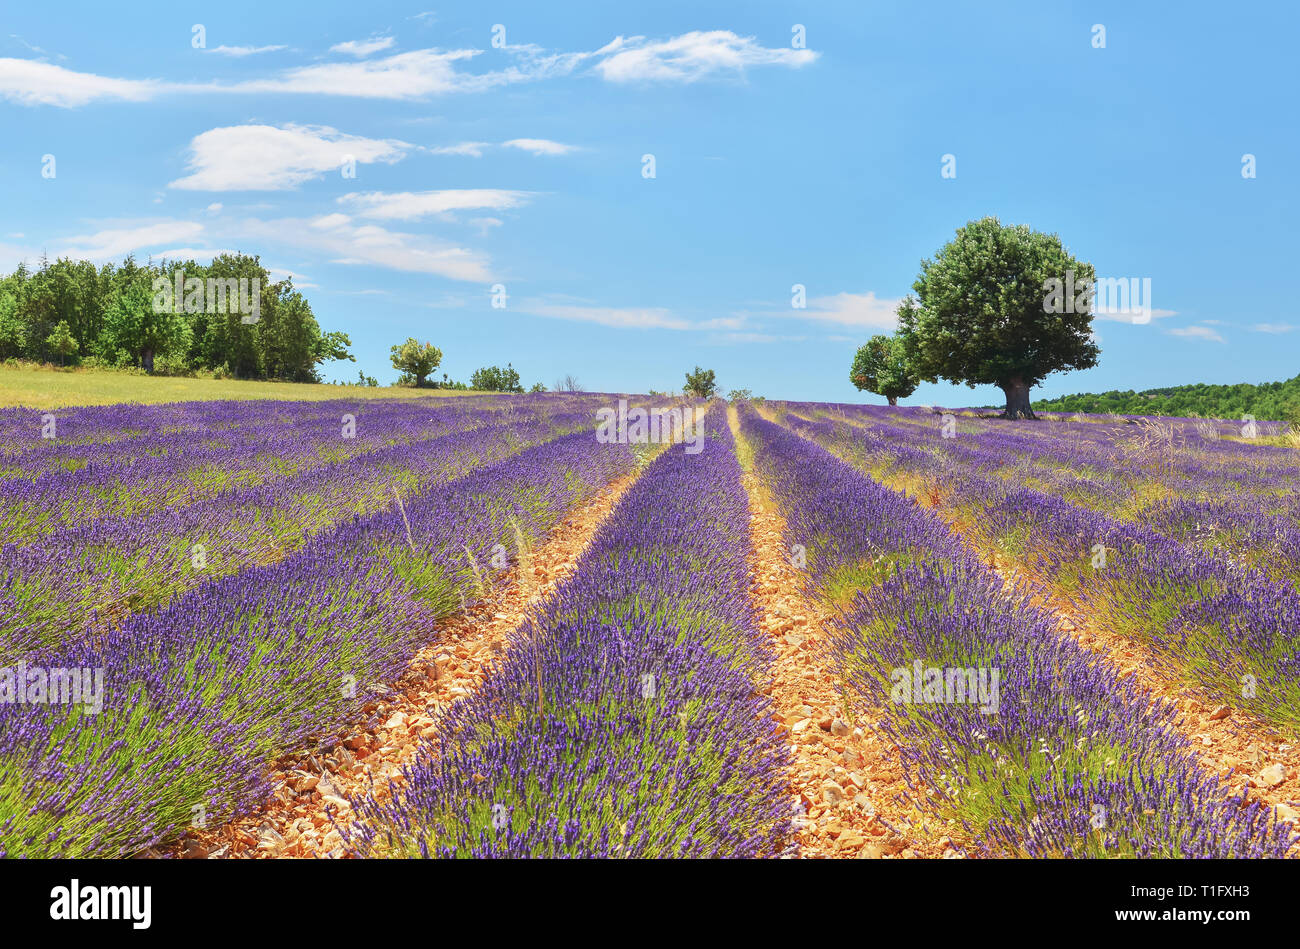 Lavender field in summer countryside, Provence, France. Rural landscape with flowering fragrant flowers in the south of France. Stock Photo